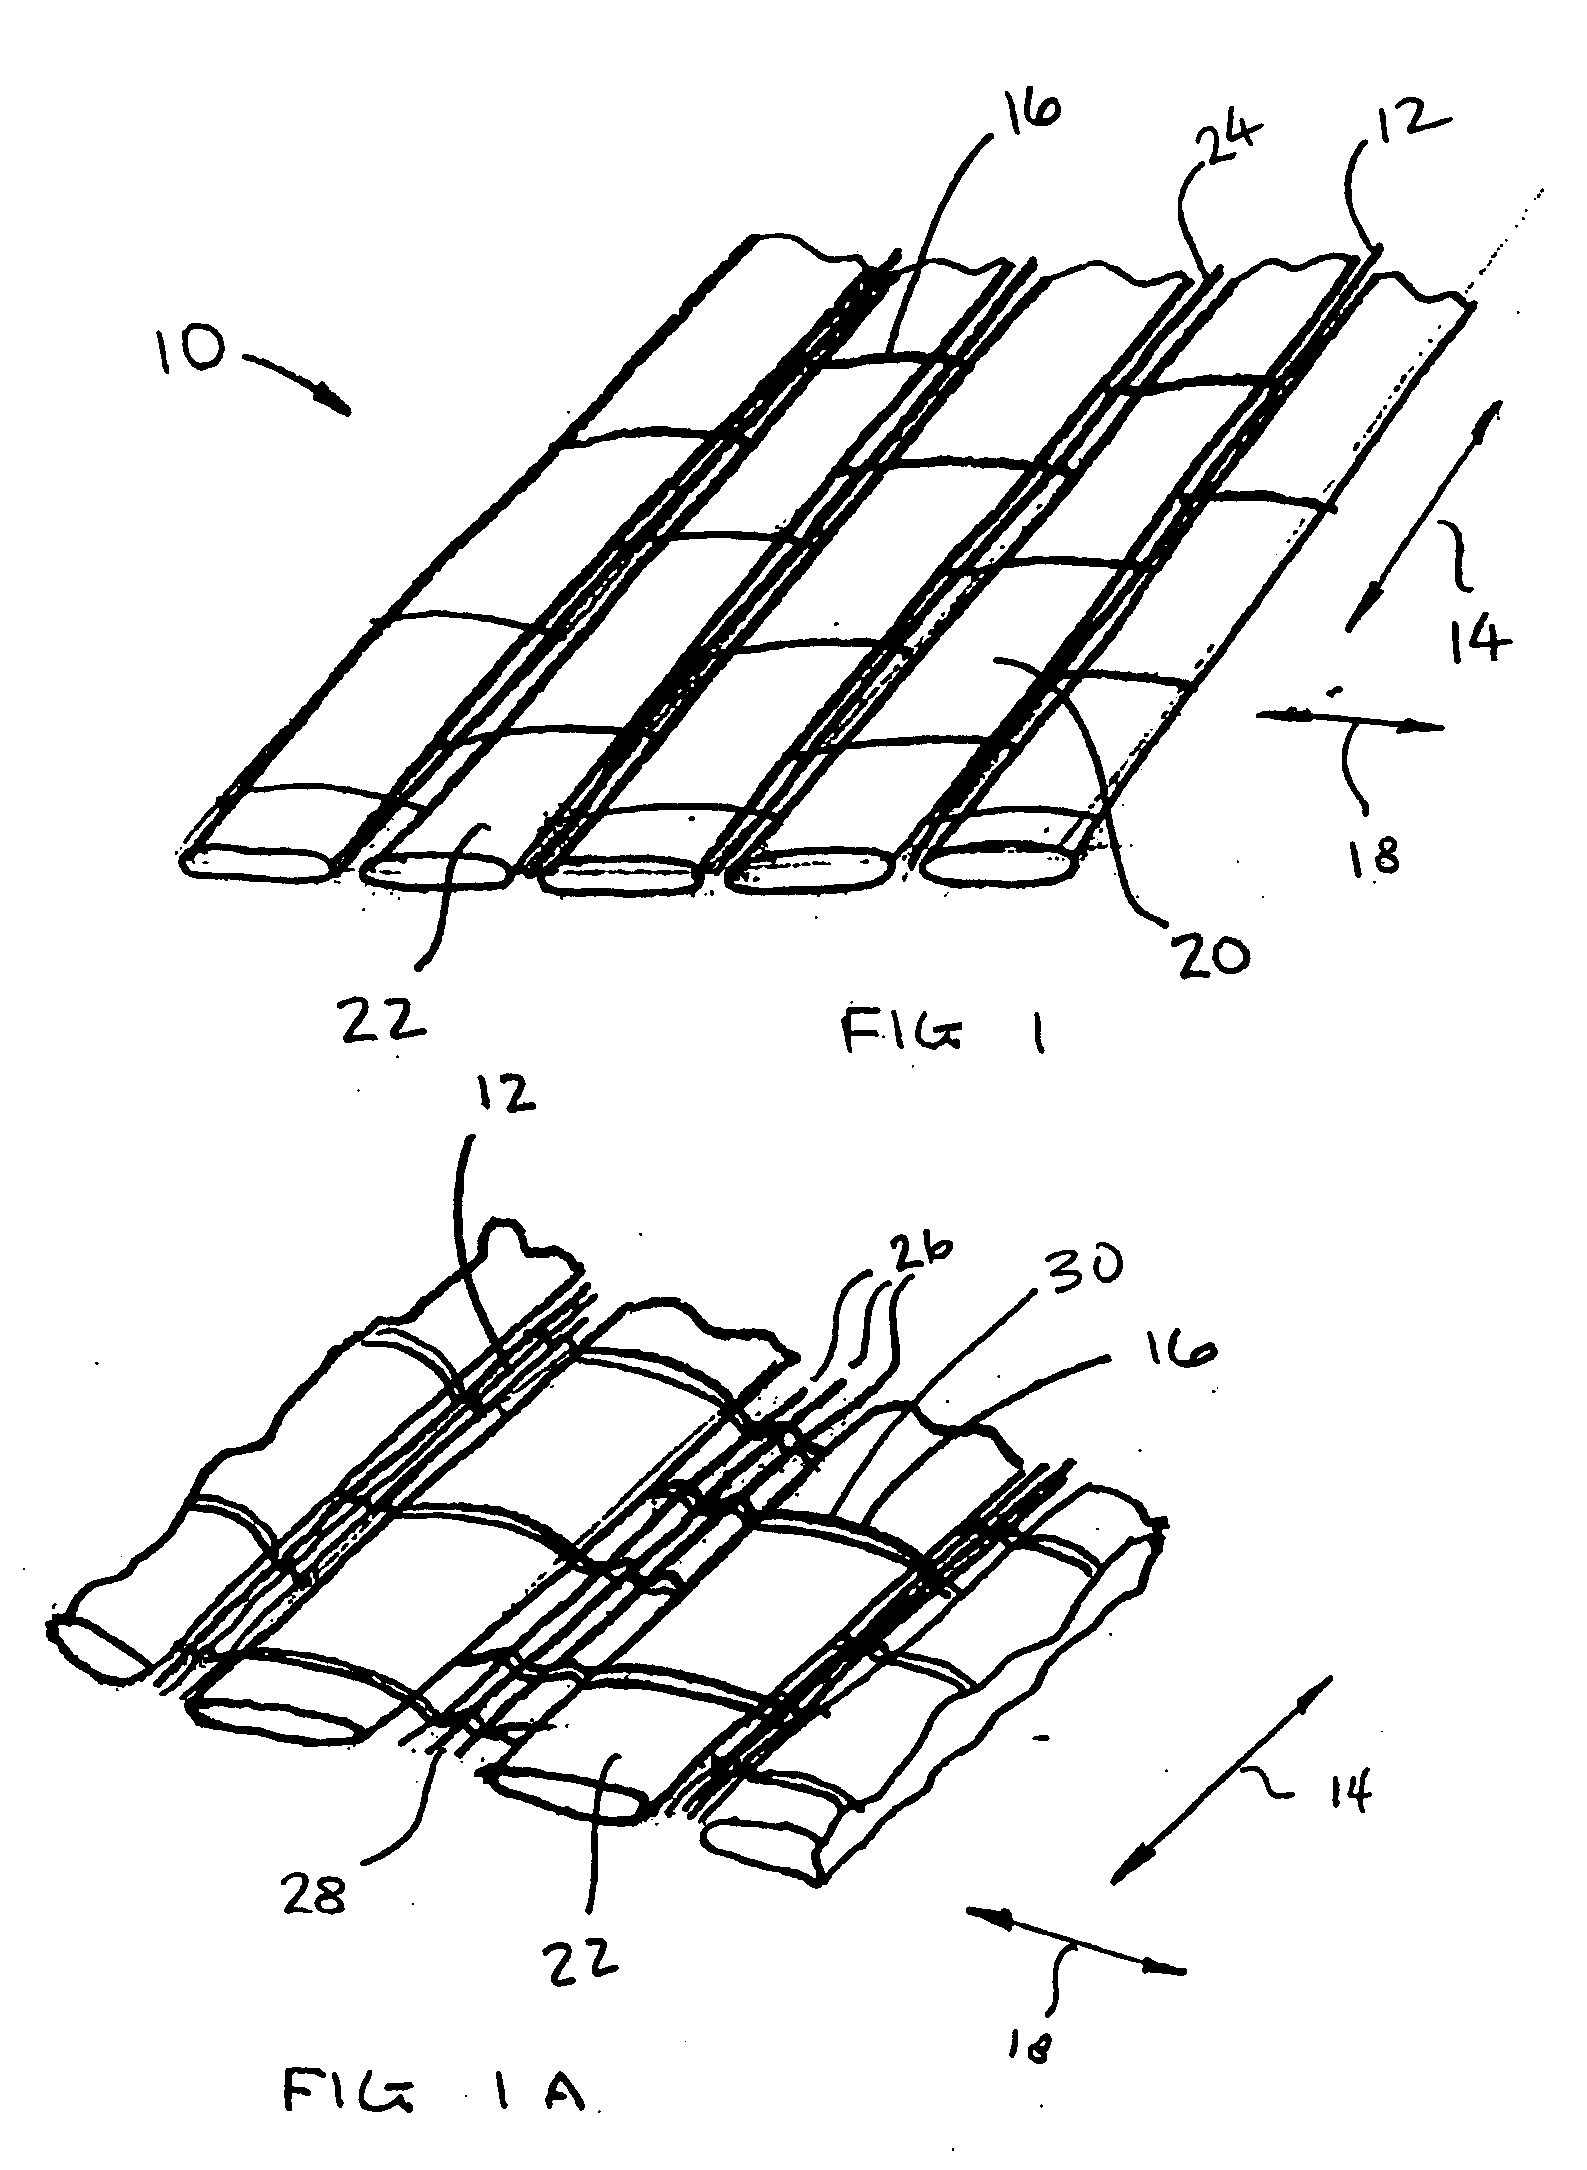 Substrate incorporating non-woven elements